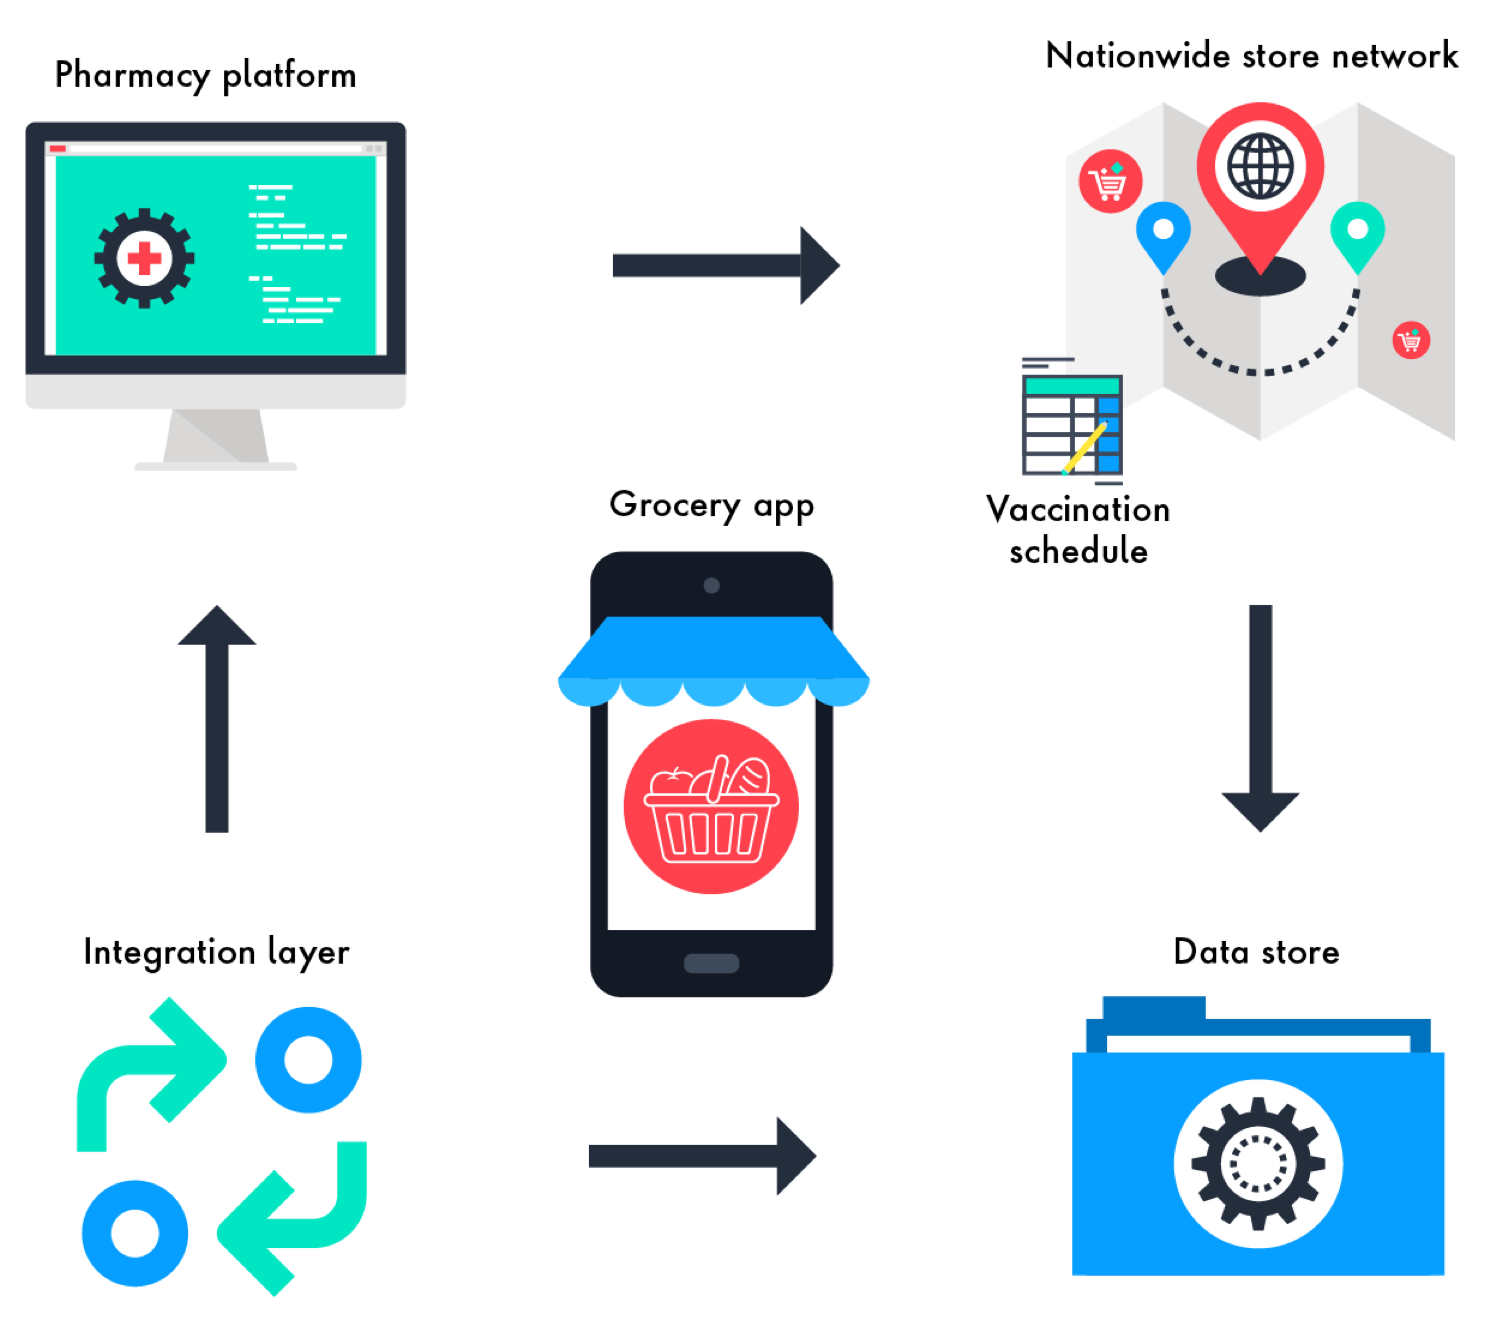 This chart illustrates the technology back-end of the omnichannel pharmacy solution, including the pharmacy platform, data storage and integration layer.